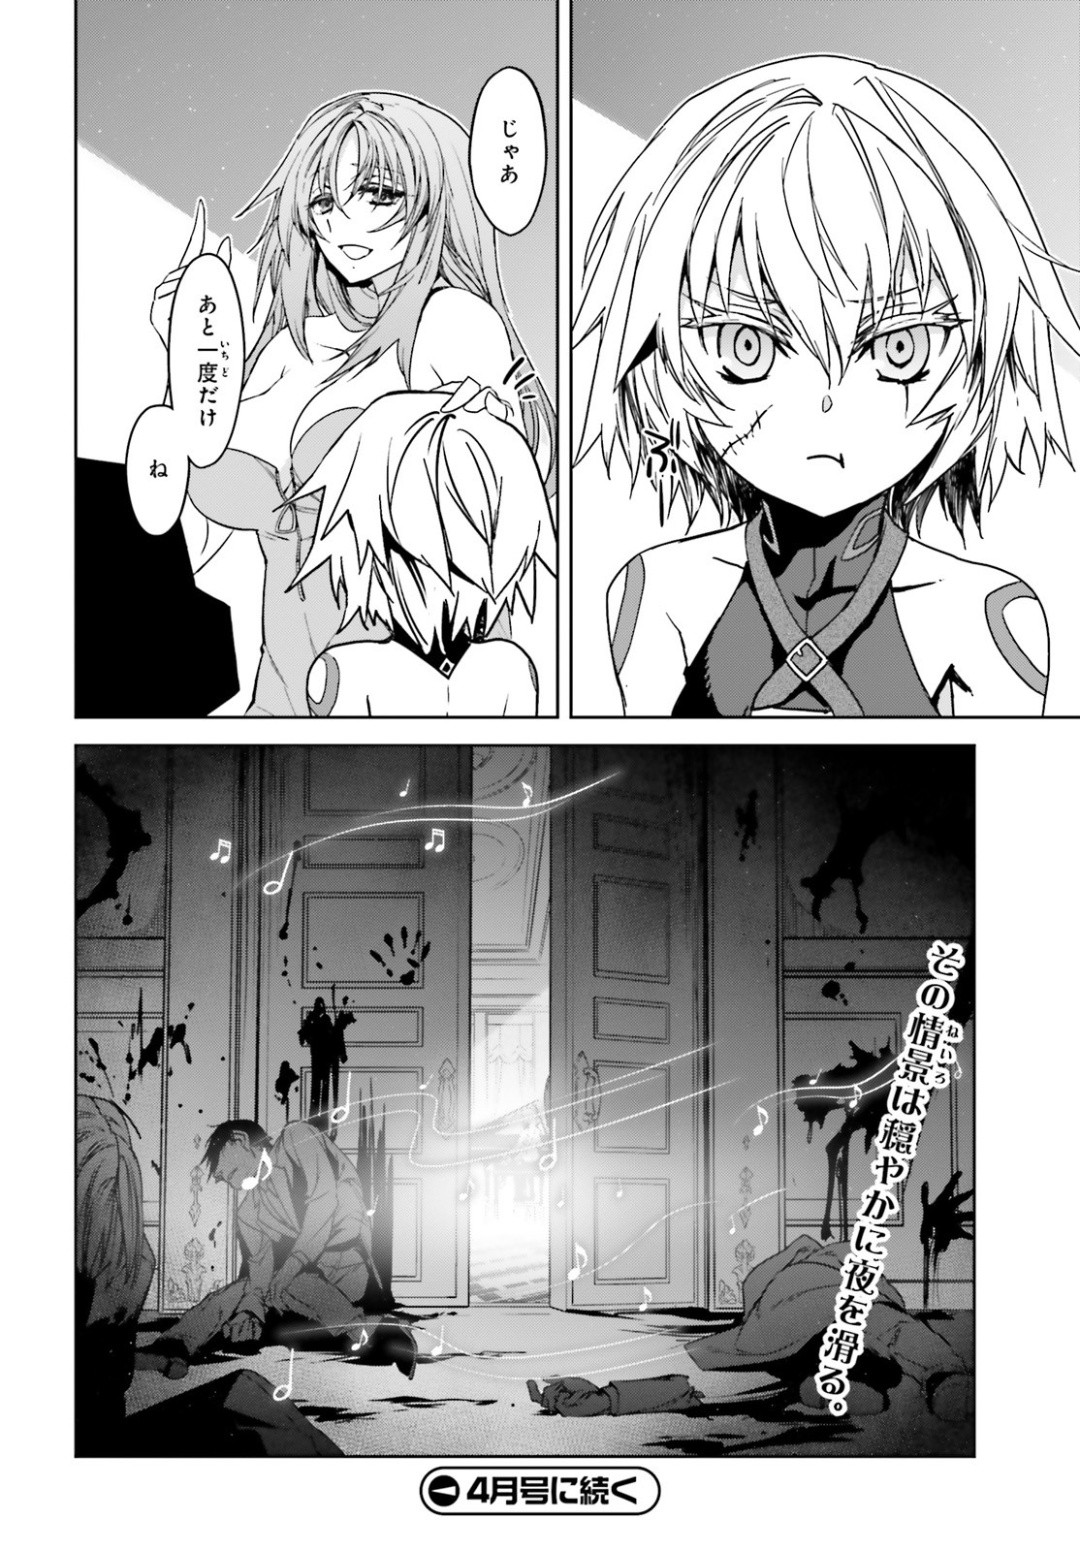 Fate-Apocrypha - Chapter 39 - Page 24